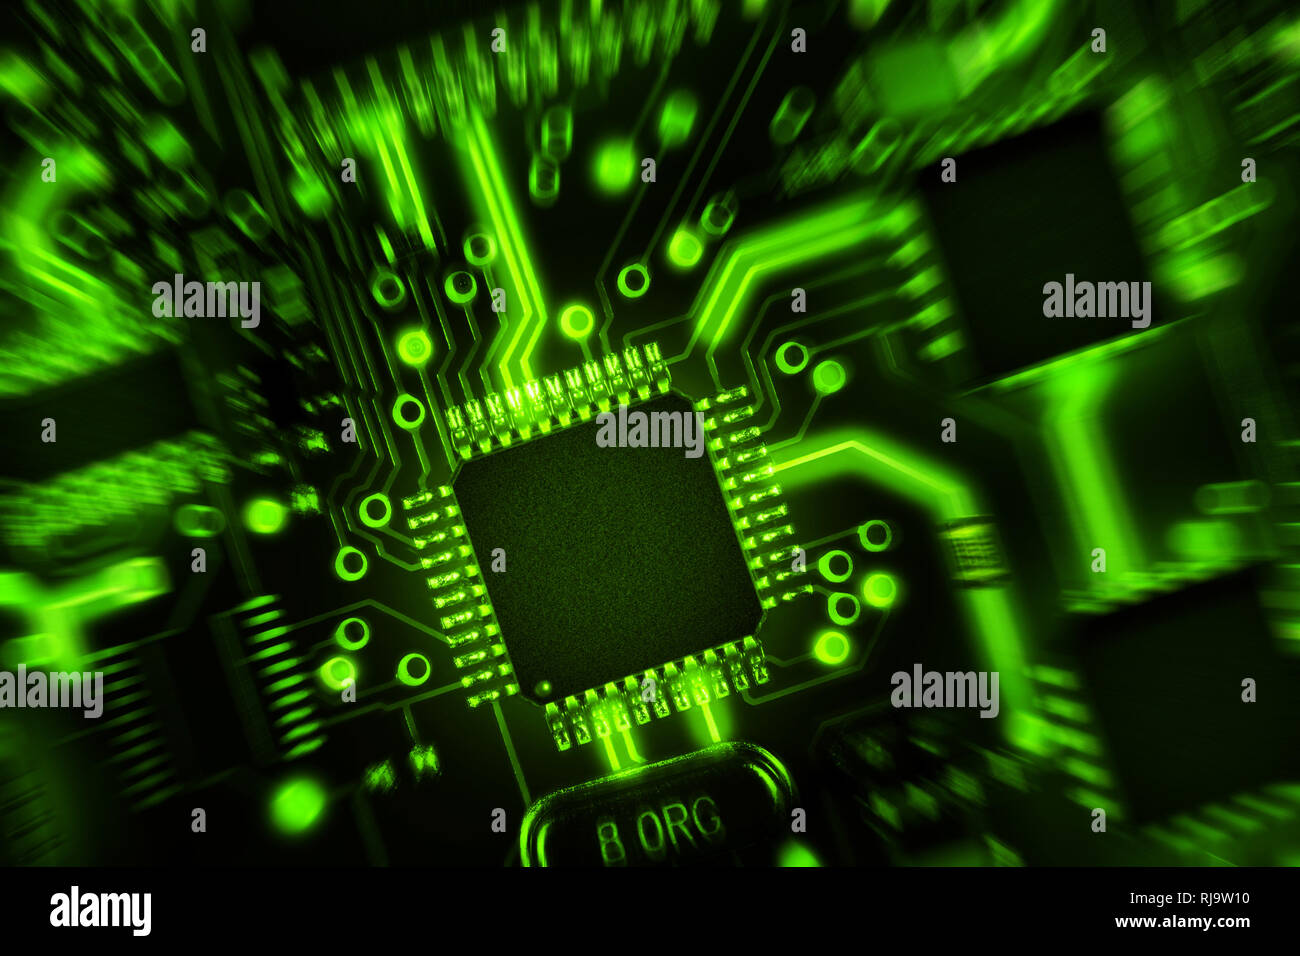 Circuit board with components in green tones. Abstract high tech background. Zoom effect. Stock Photo